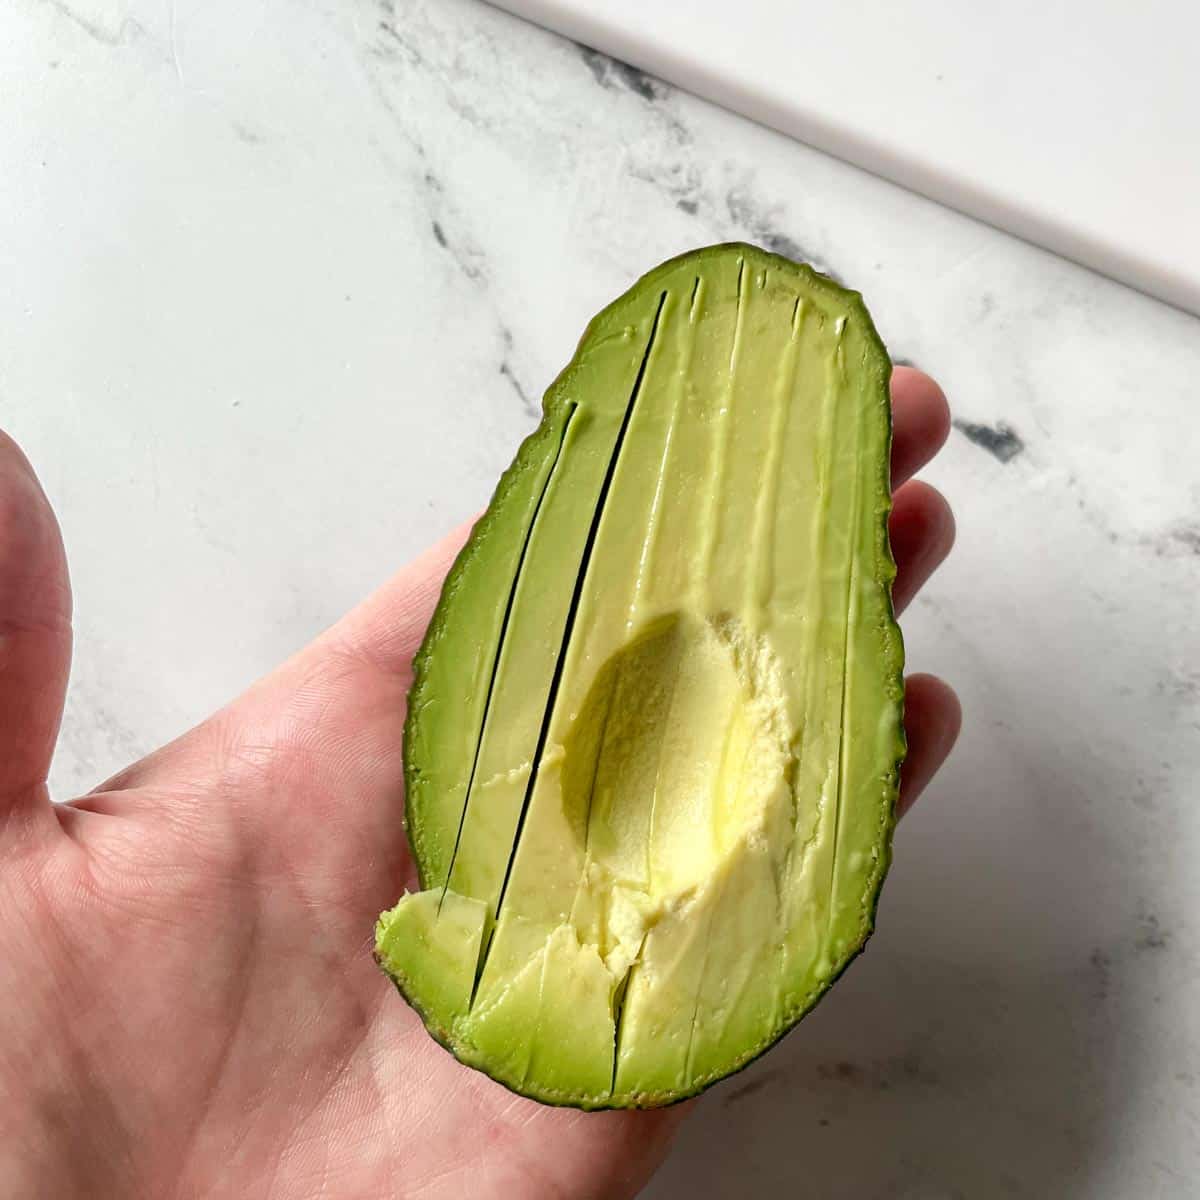 Half of an avocado is shown thinly sliced in its skin.